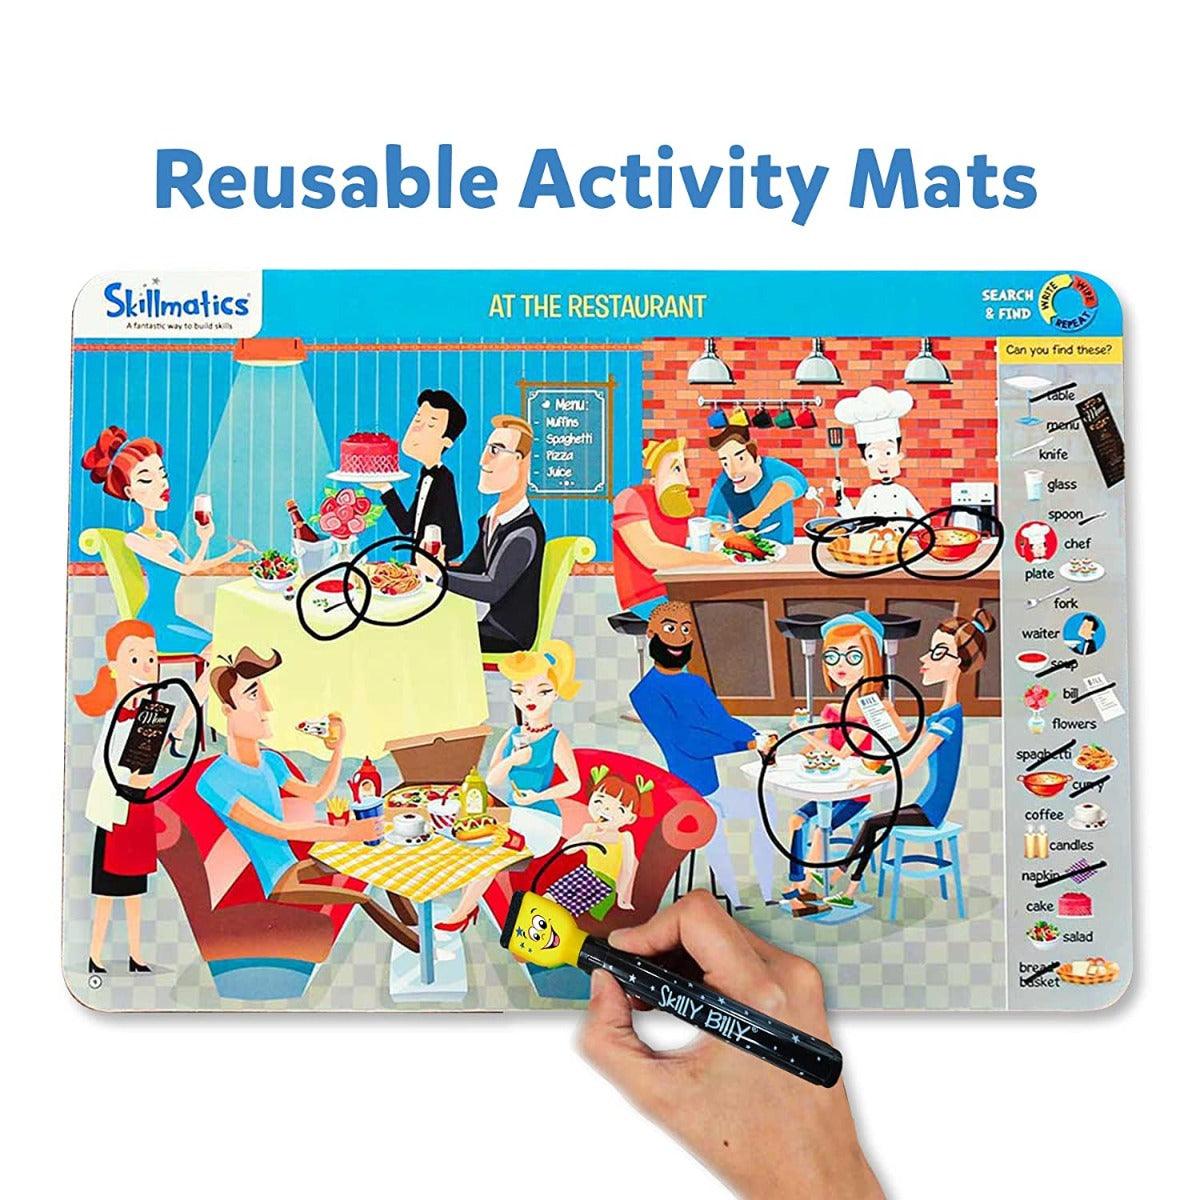 Skillmatics Educational Game - Search and Find Reusable Activity Mats with 2 Marker Pens Gifts & Preschool Learning for Ages 3 to 6